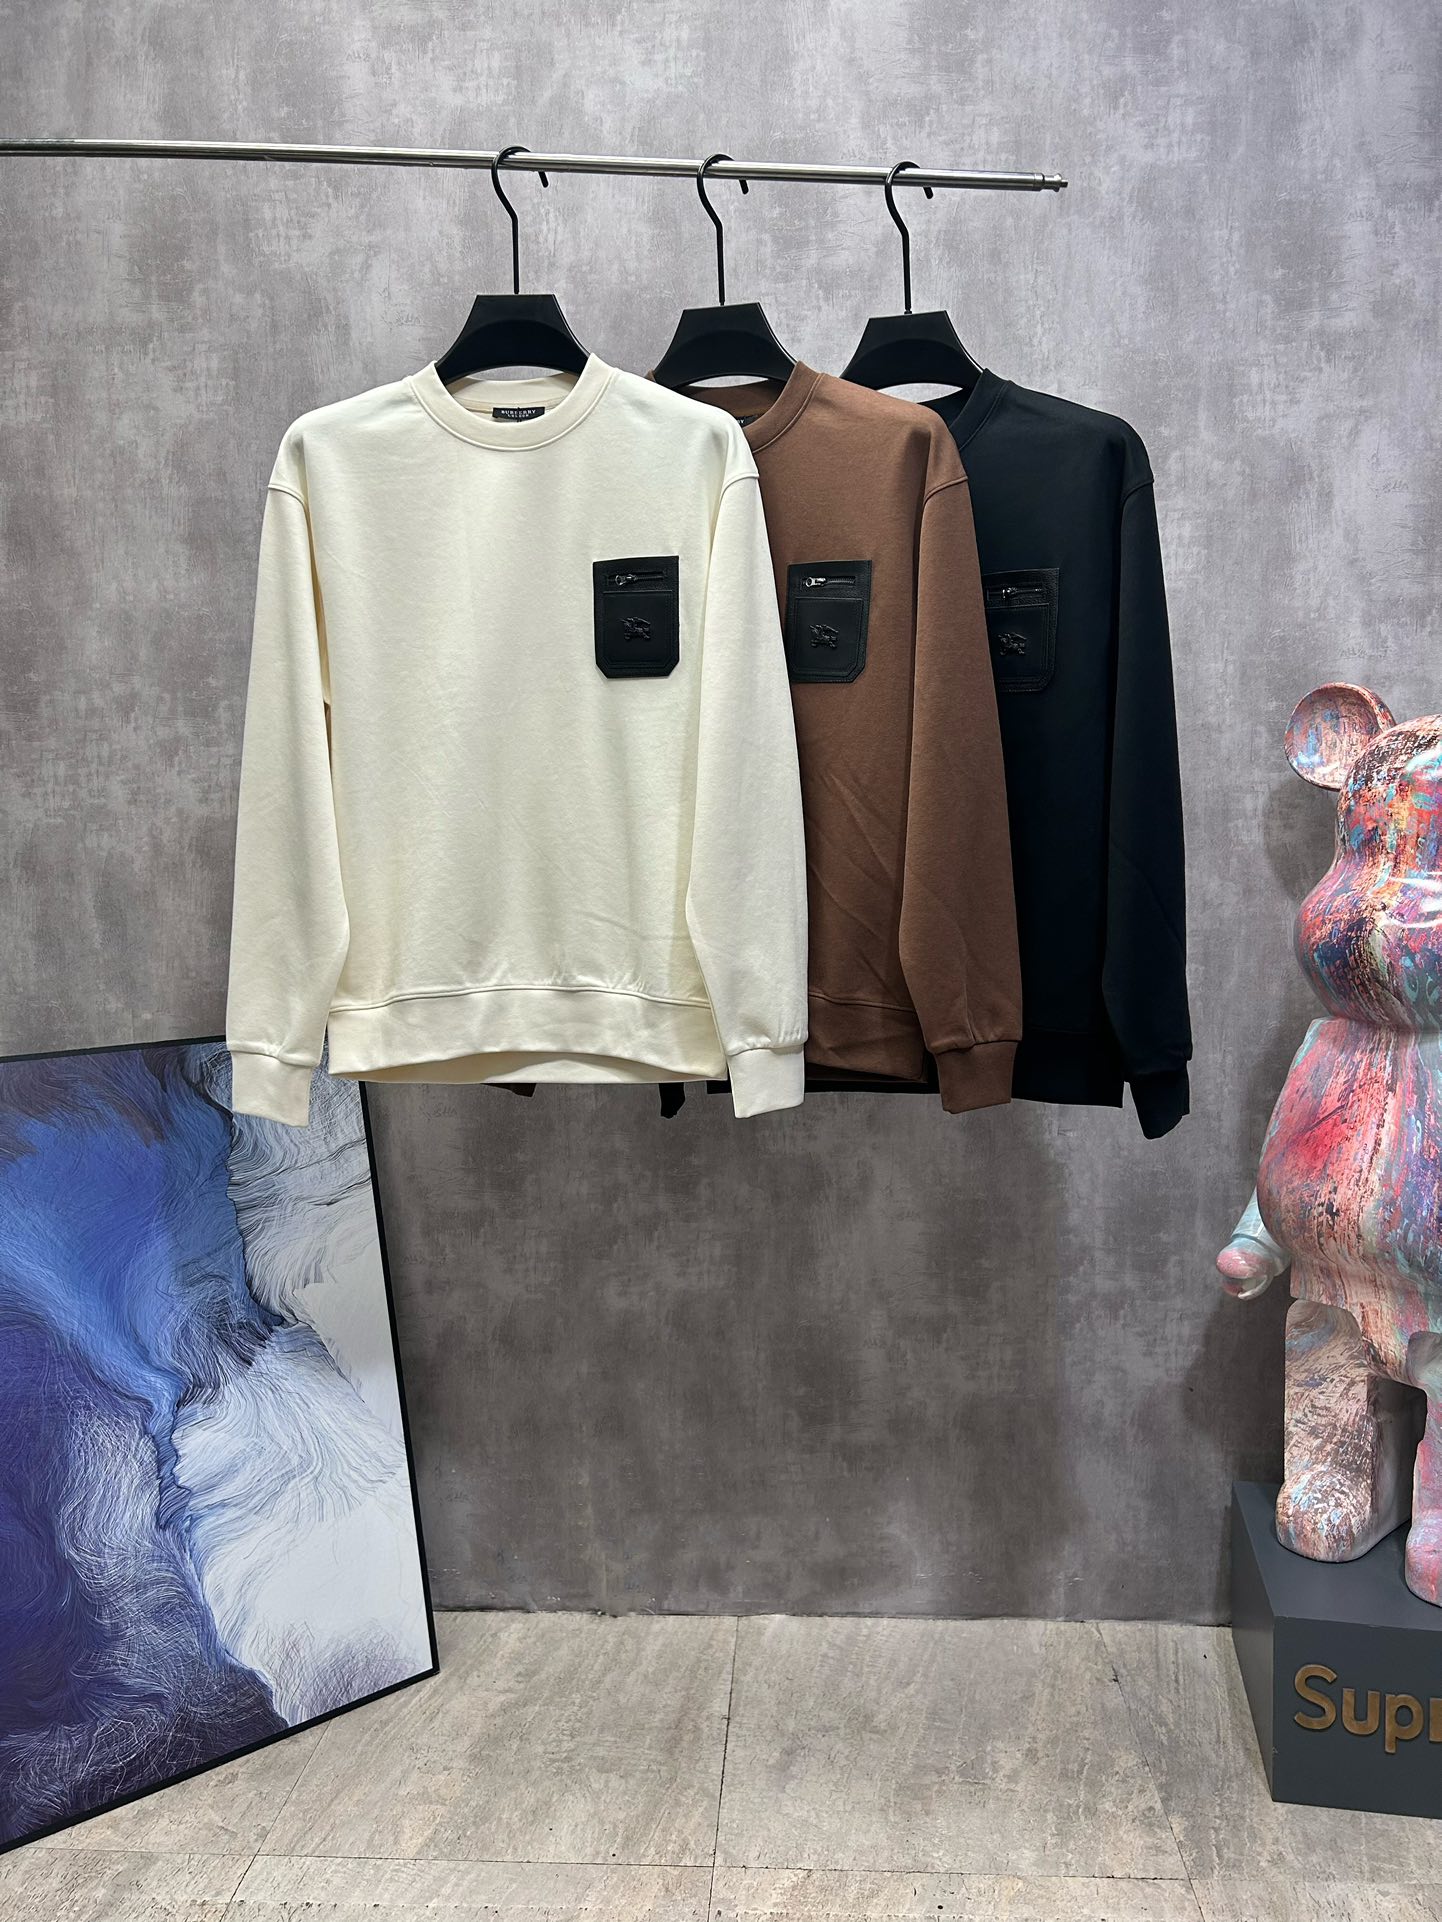 The Best
 Burberry Clothing Sweatshirts Beige Black Brown White Cotton Spring Collection Long Sleeve